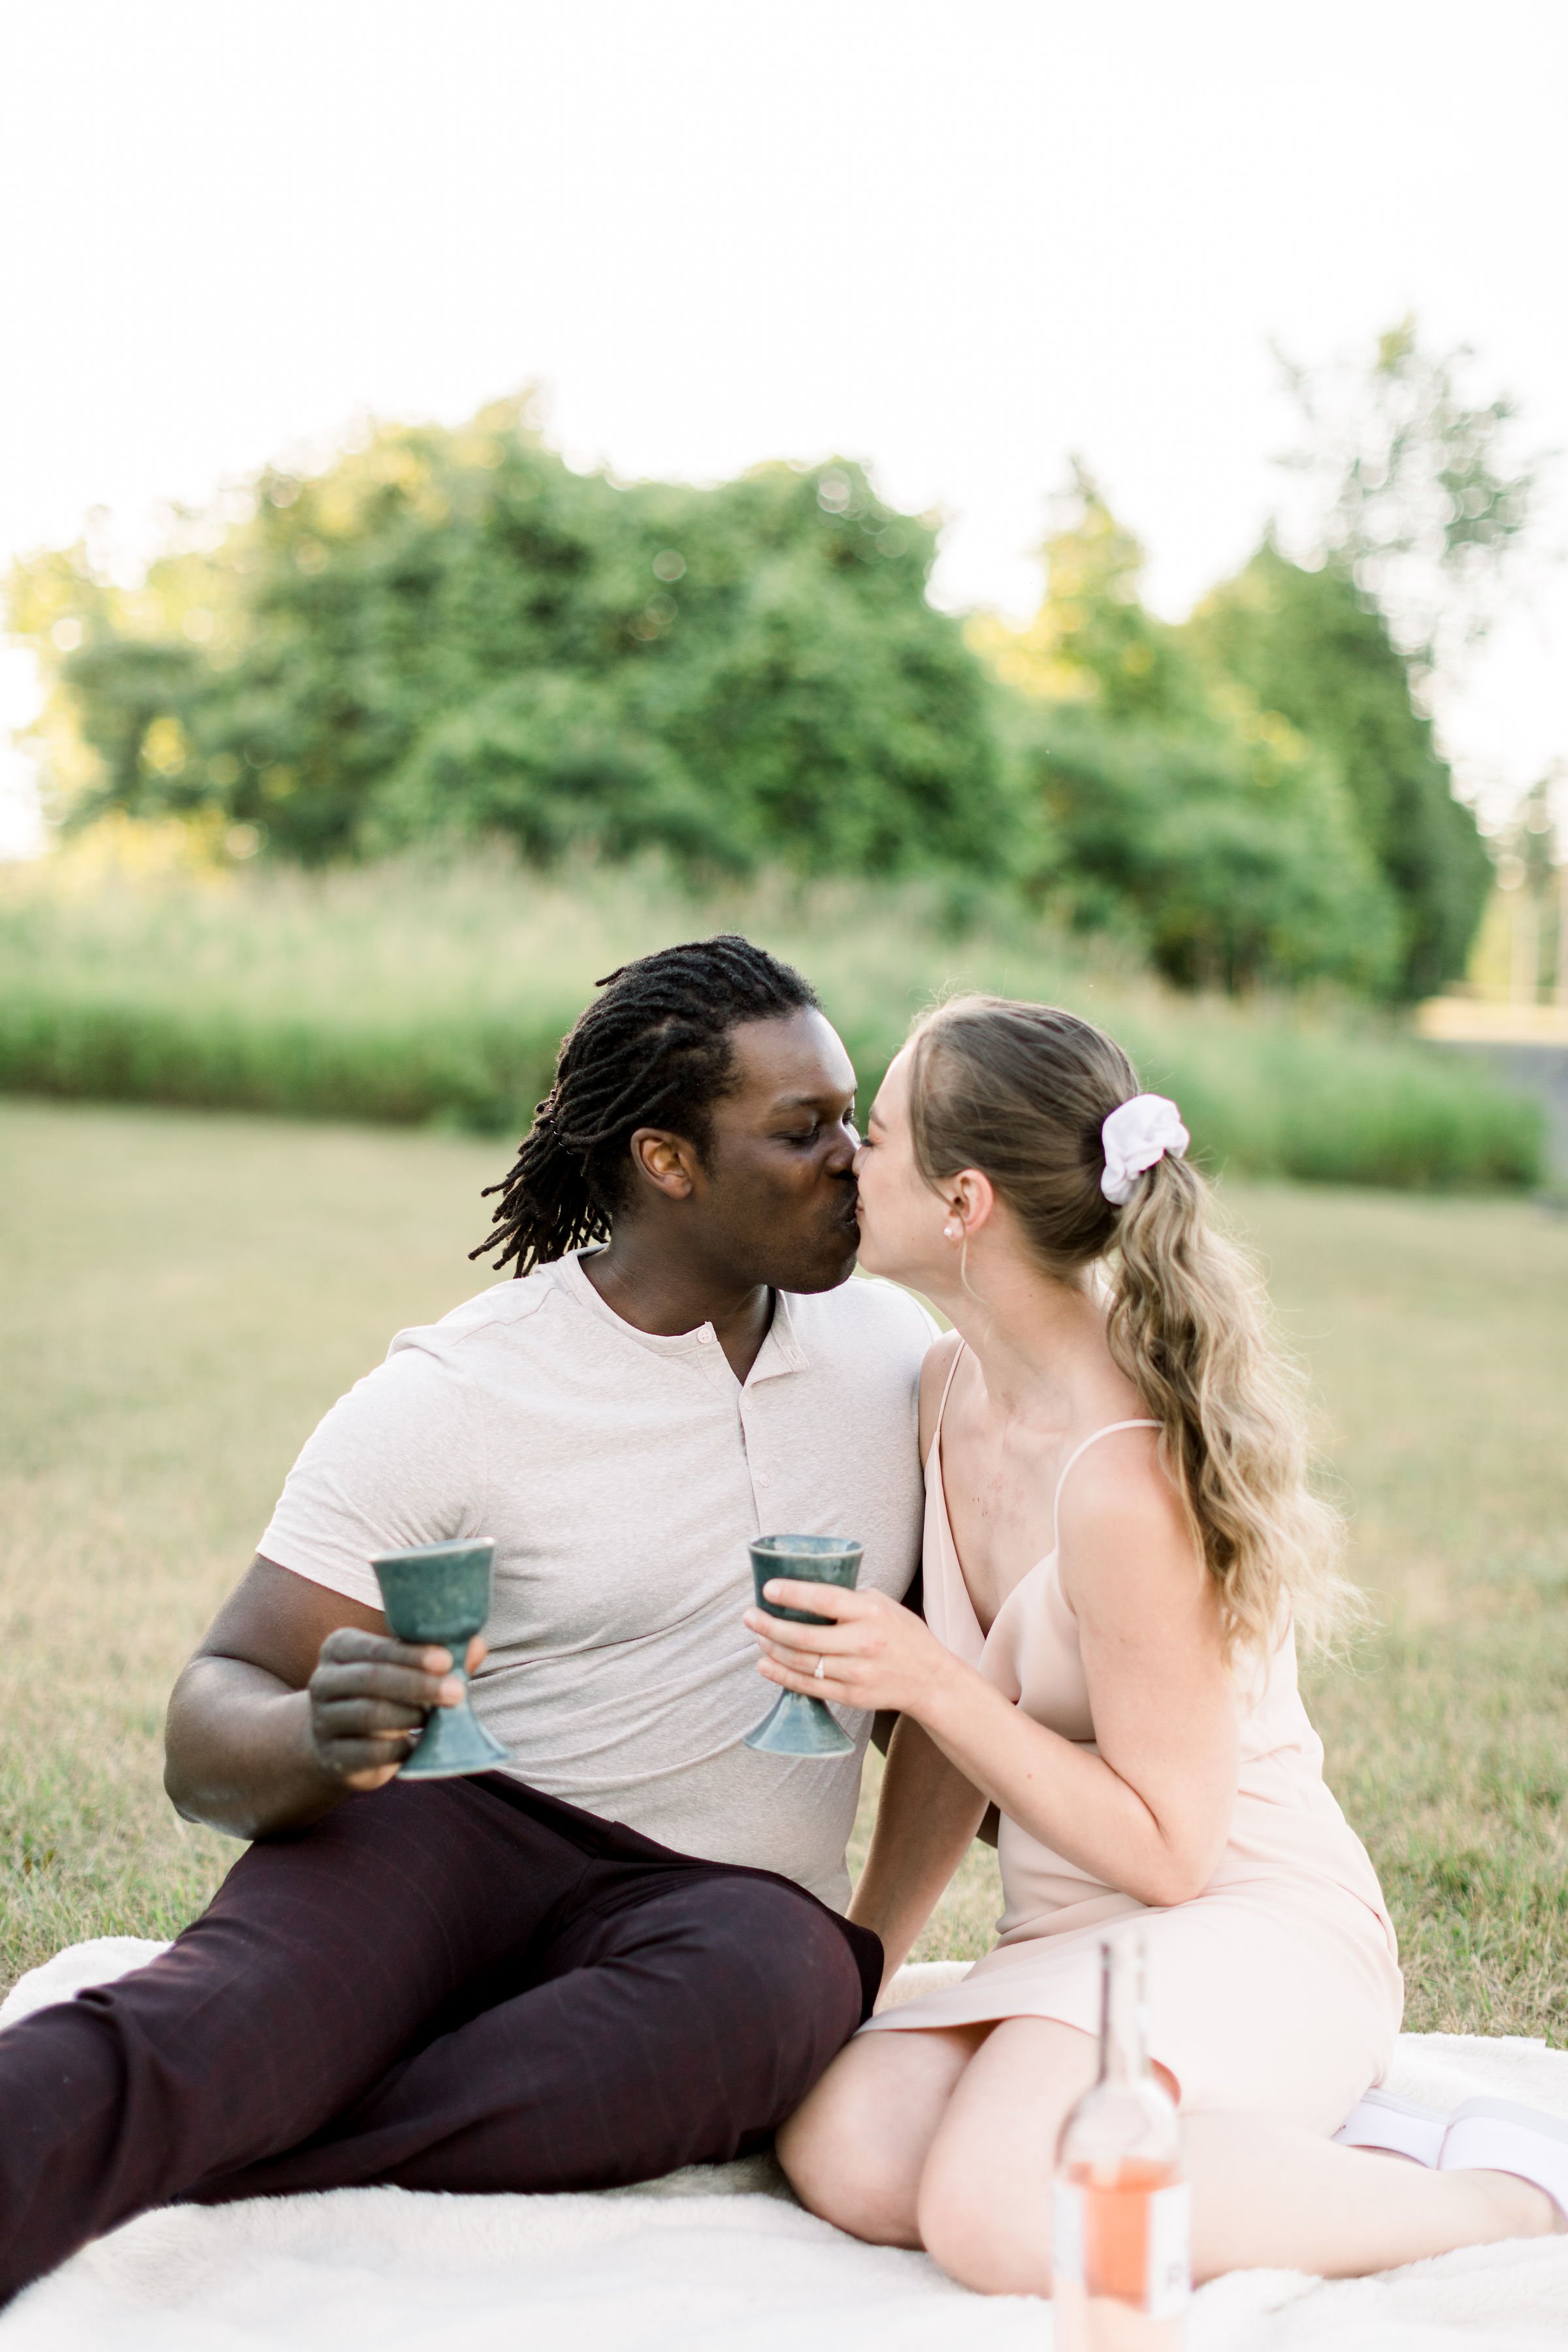  Newly engaged couple kiss with cups in their hand celebrating by Chelsea Mason Photography. kissing while drinking marriage goals #Chelseamasonphotography #Chelseamasonengagements #Onatarioengagements #Pinhey'sPoint #Ontarioweddingphotographers 